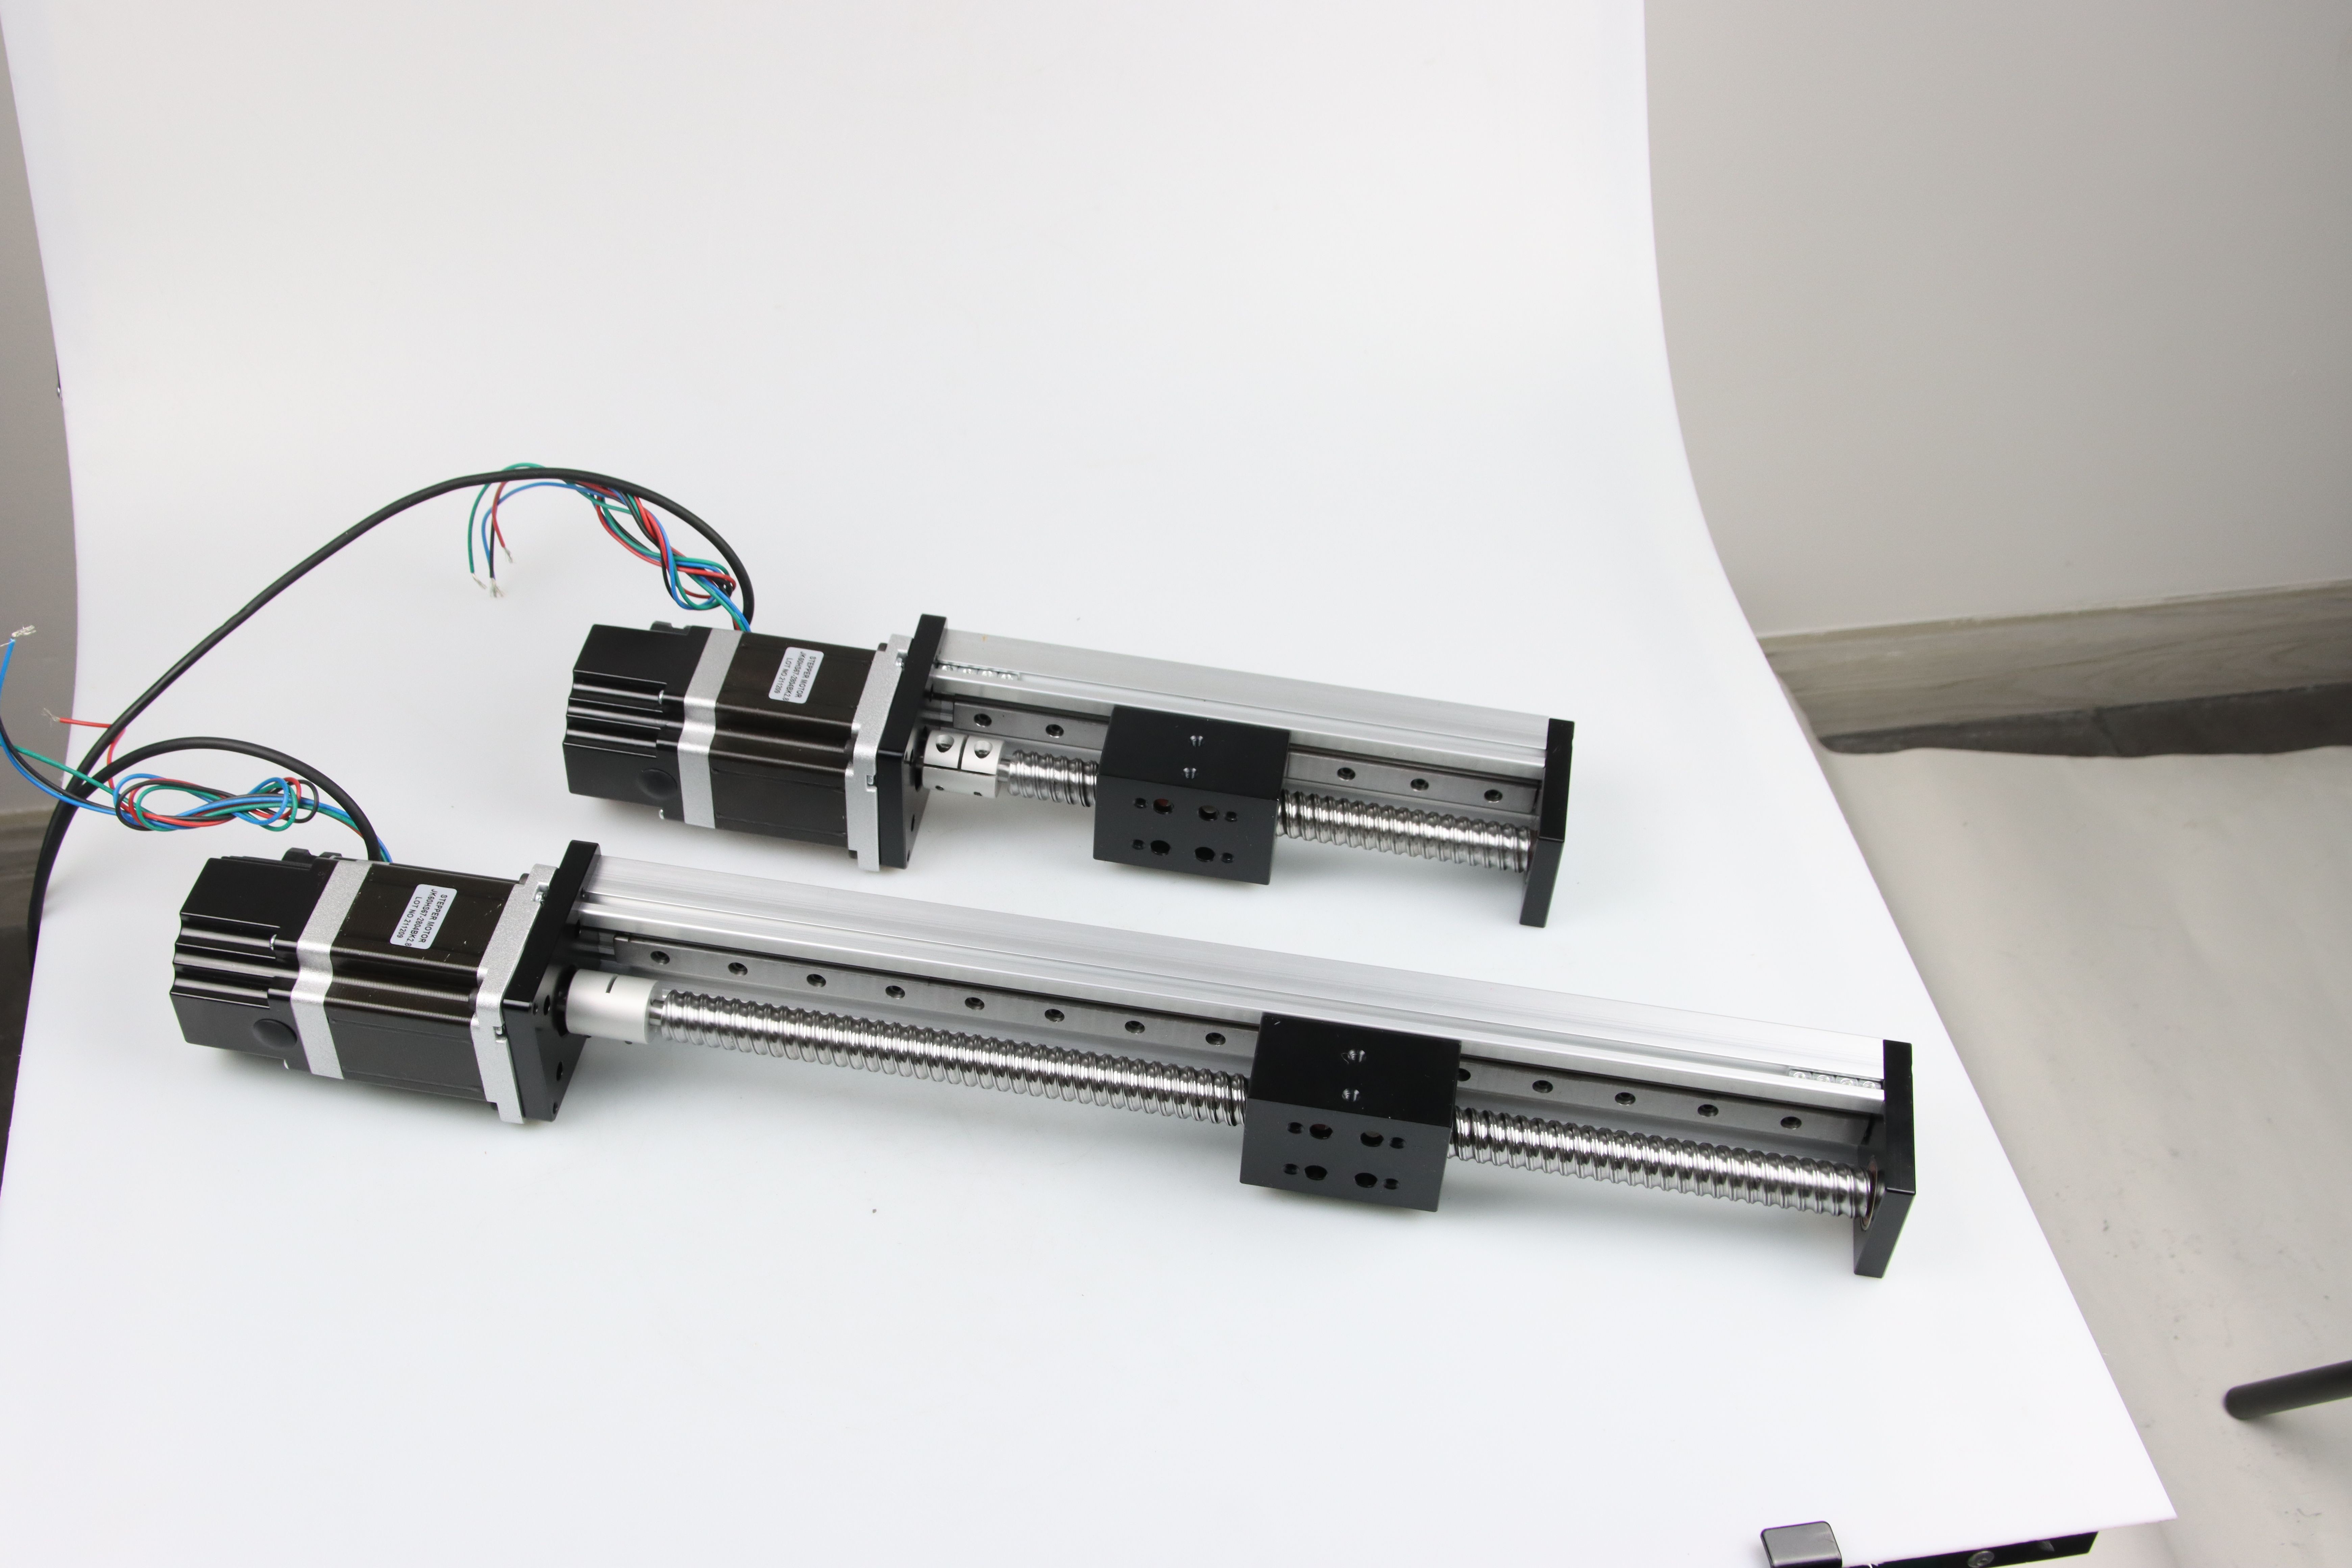 Slide Table Linear Screw  Stepping Motor Numerical Control